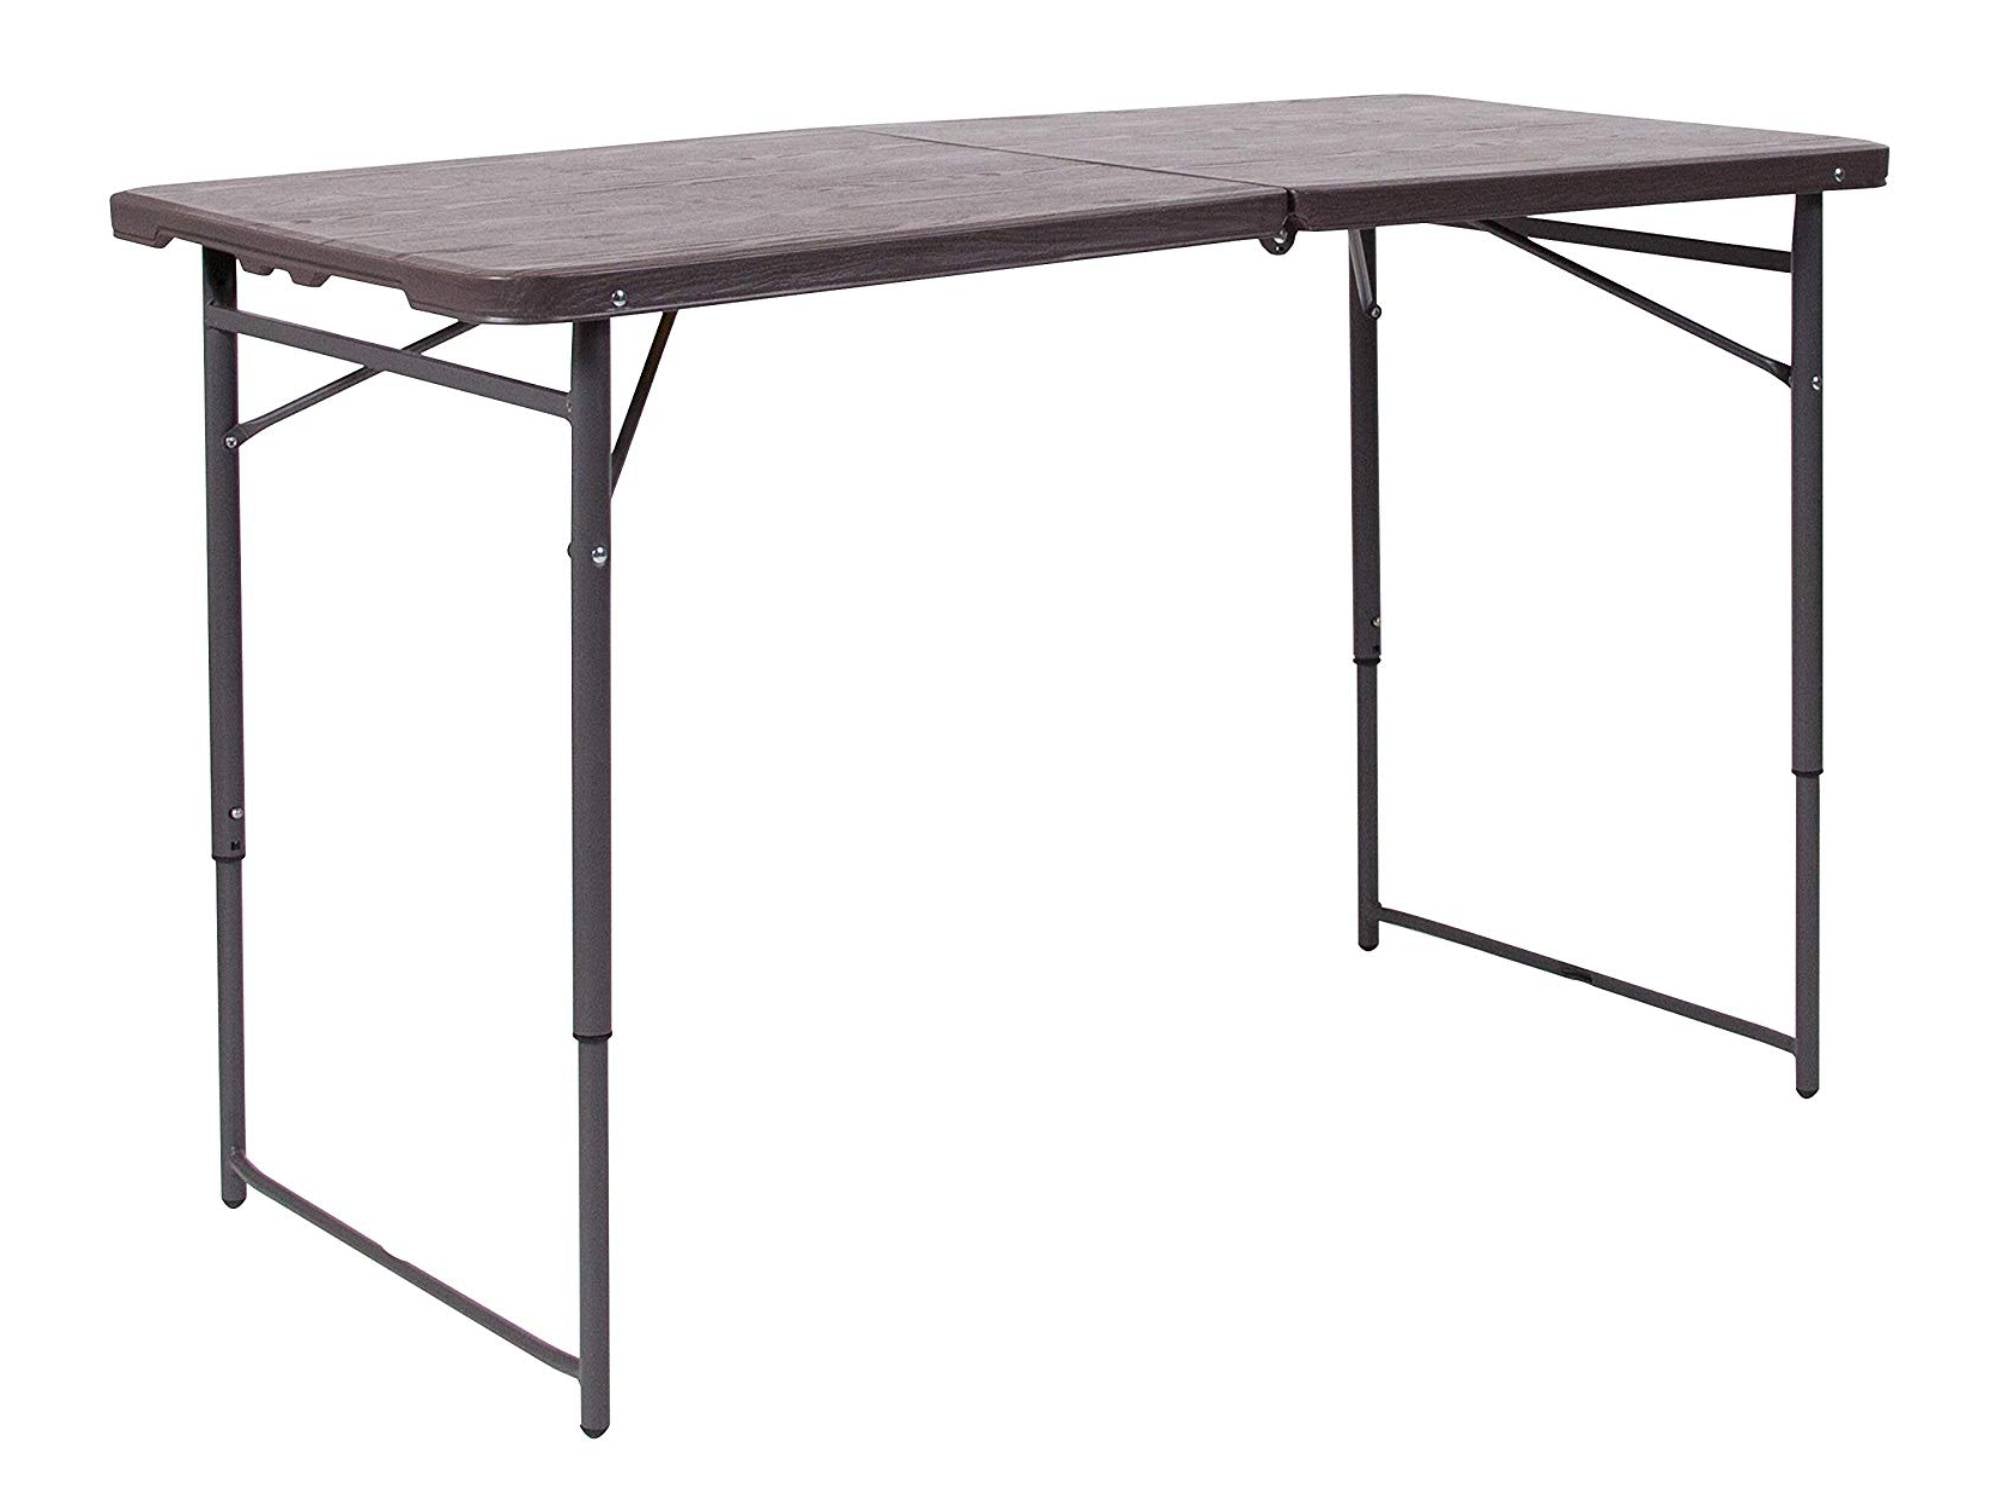 Dining & Banquet Table Rentals